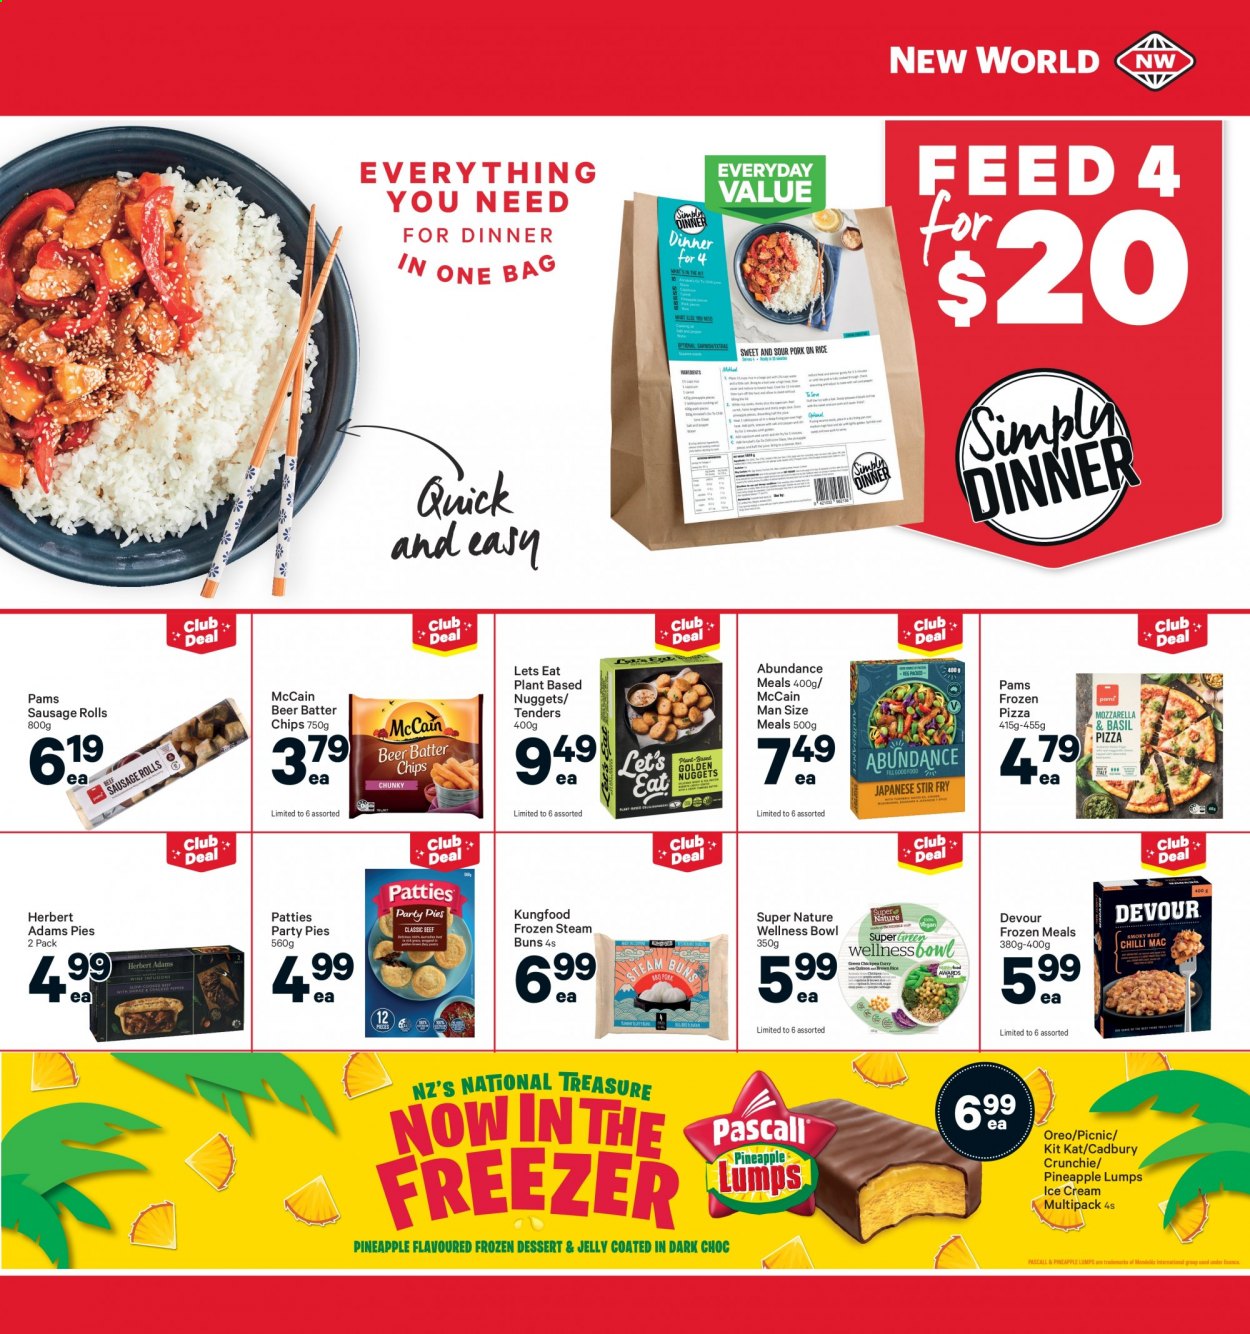 thumbnail - New World mailer - 12.04.2021 - 18.04.2021 - Sales products - sausage rolls, buns, pineapple, pizza, nuggets, wellness bowl, sausage, Oreo, ice cream, Devour, McCain, KitKat, jelly, Cadbury, quinoa, rice, wine, Cook's, beer. Page 21.